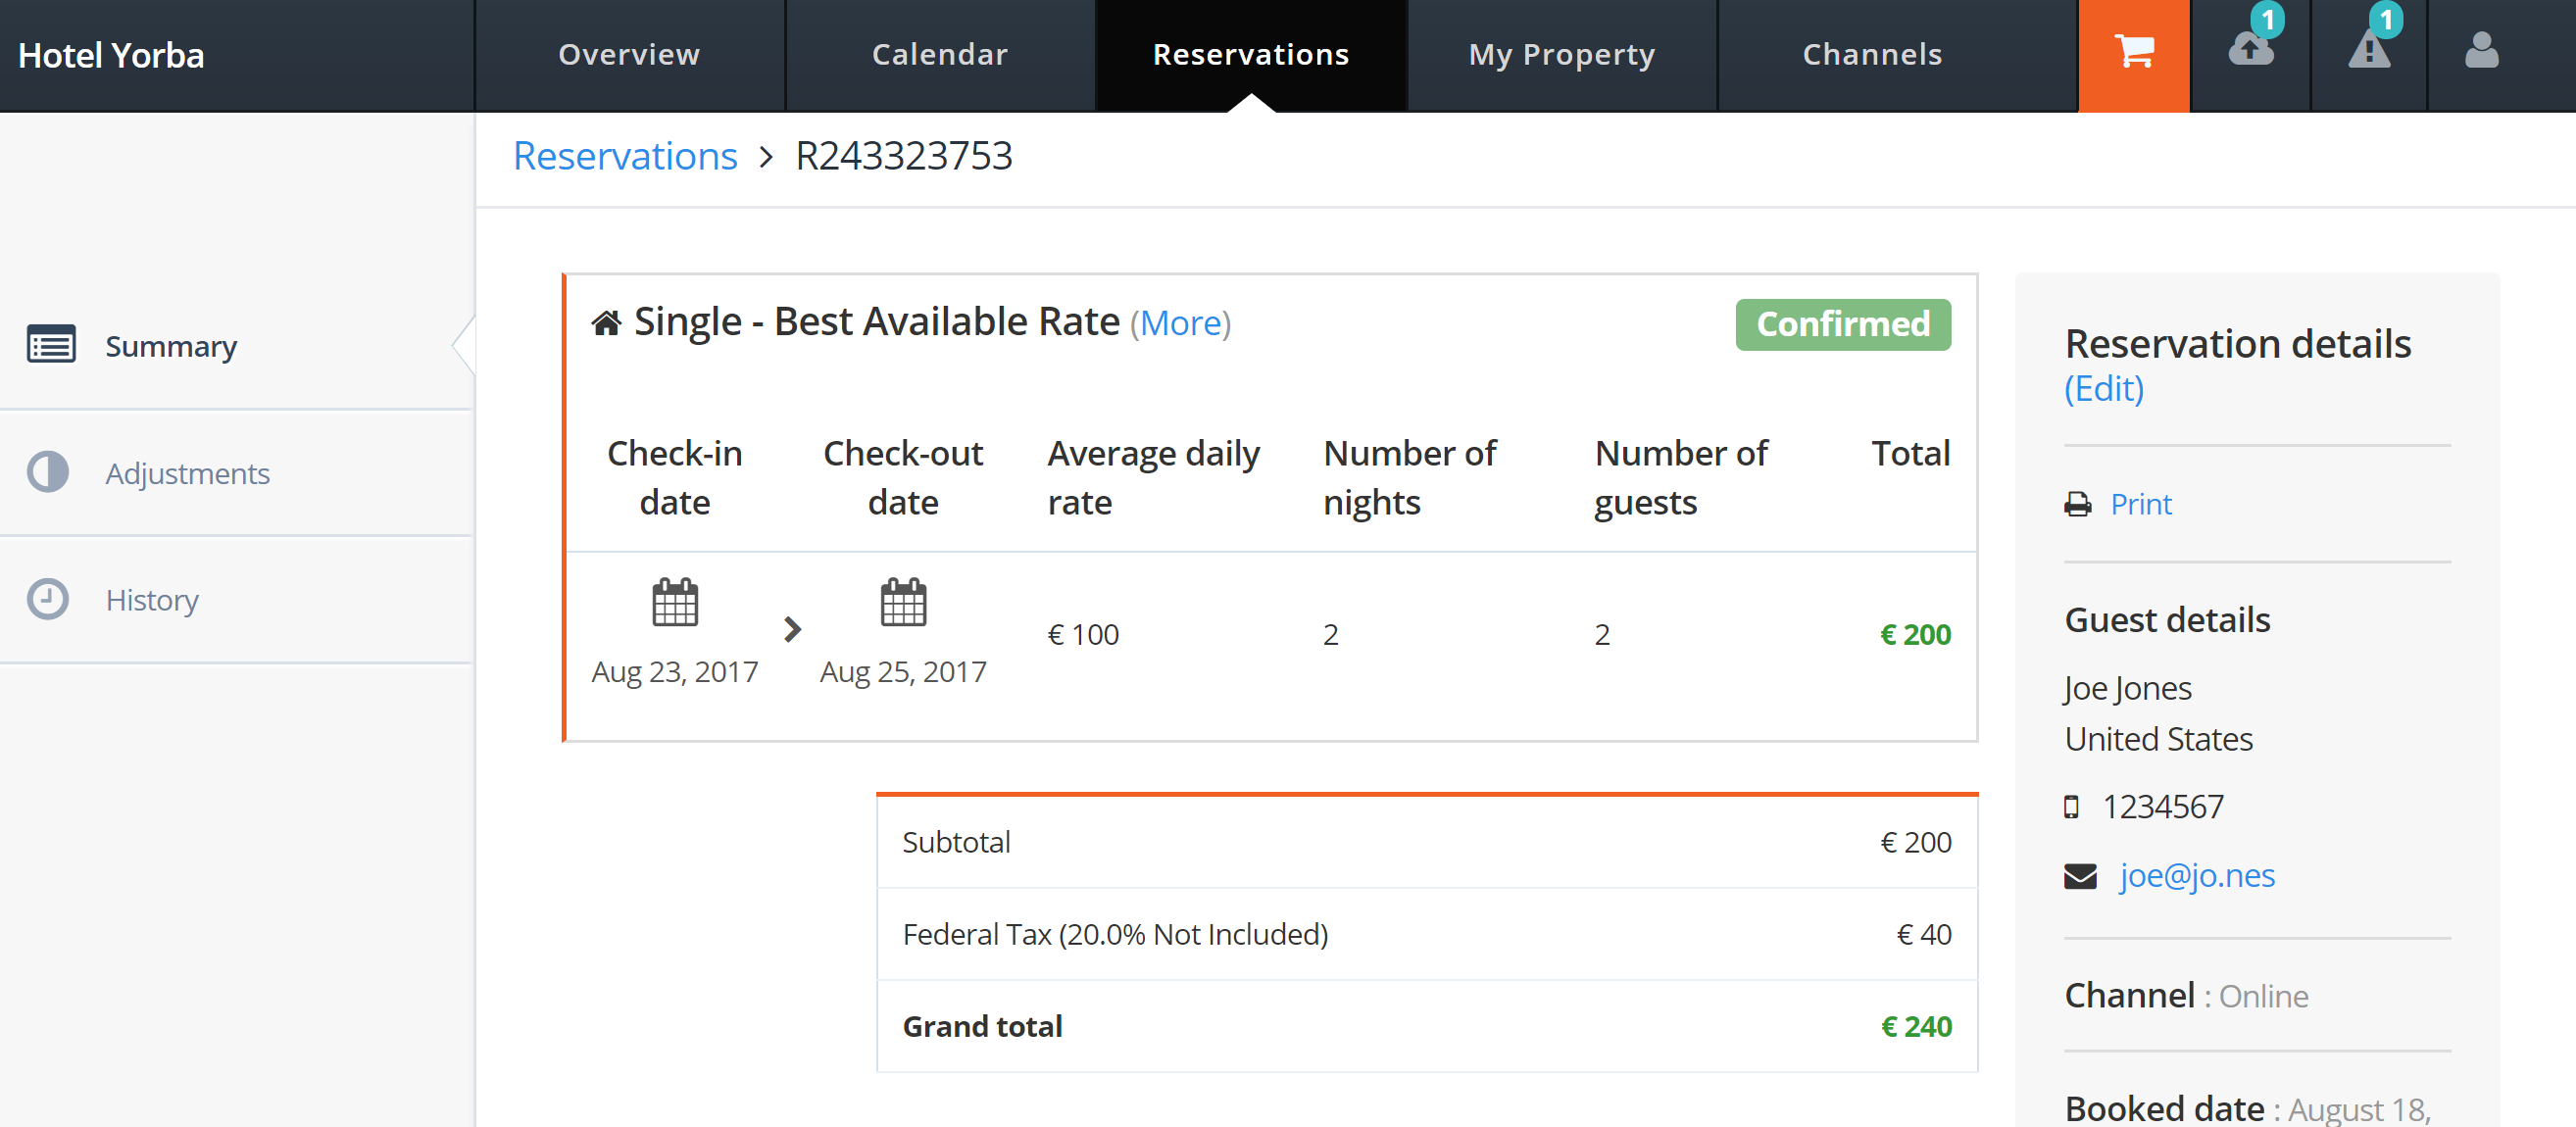 MyHotelCRS.com.com Click 'view' to view the details for the new reservation booking updated to 'Confirmed' in MyHotelCRS.com's portal